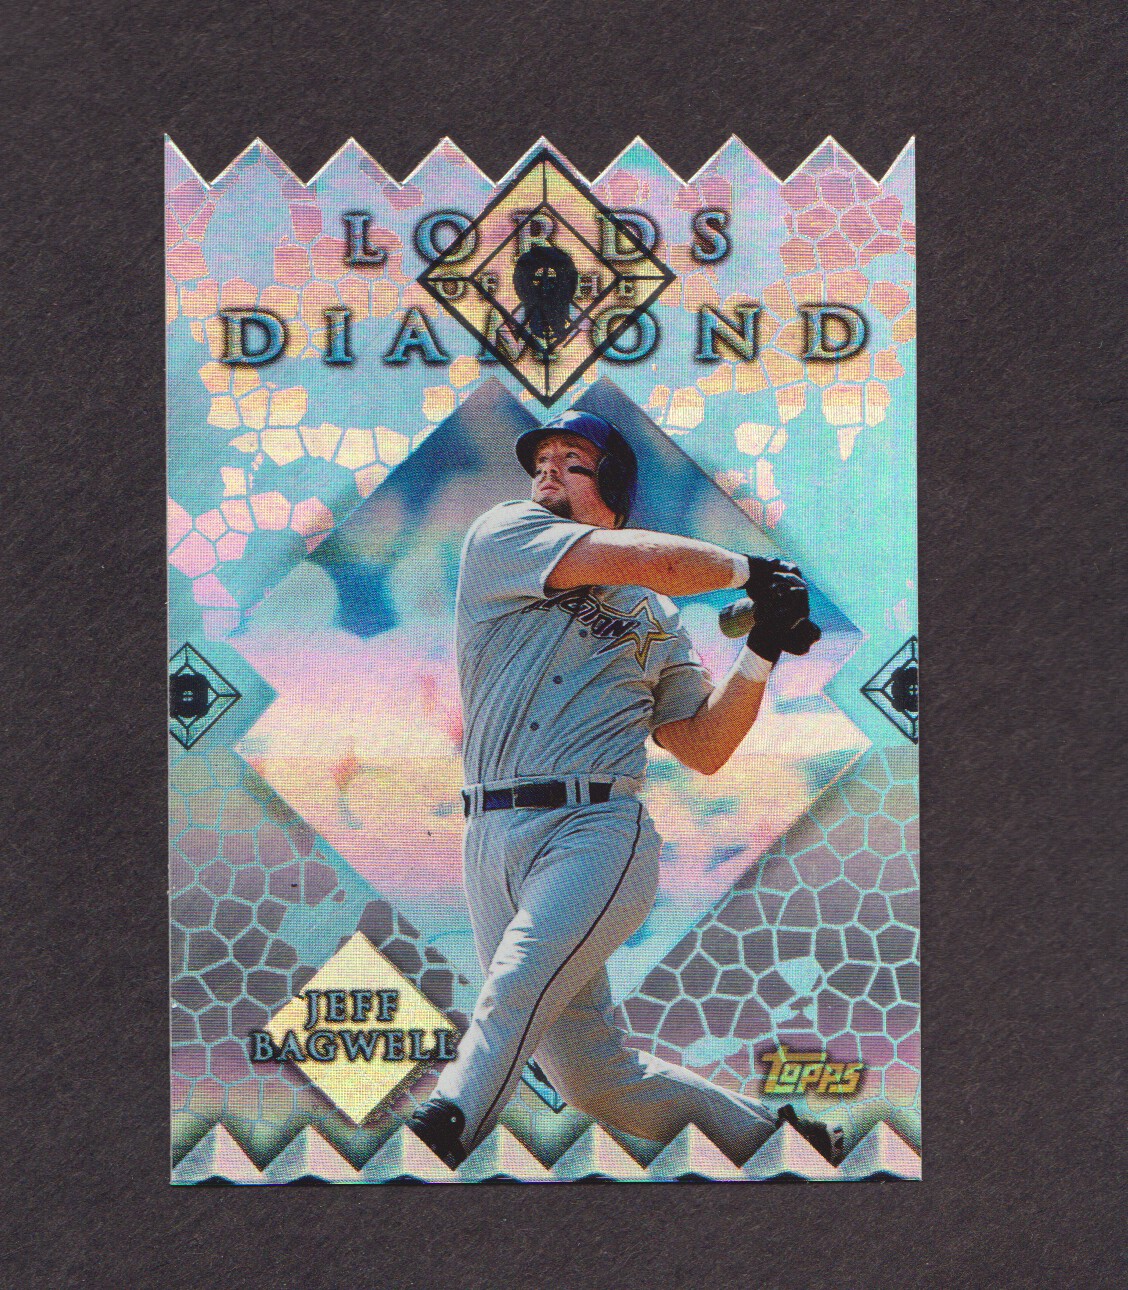 1999 Topps Lords of the Diamond #LD6 Jeff Bagwell